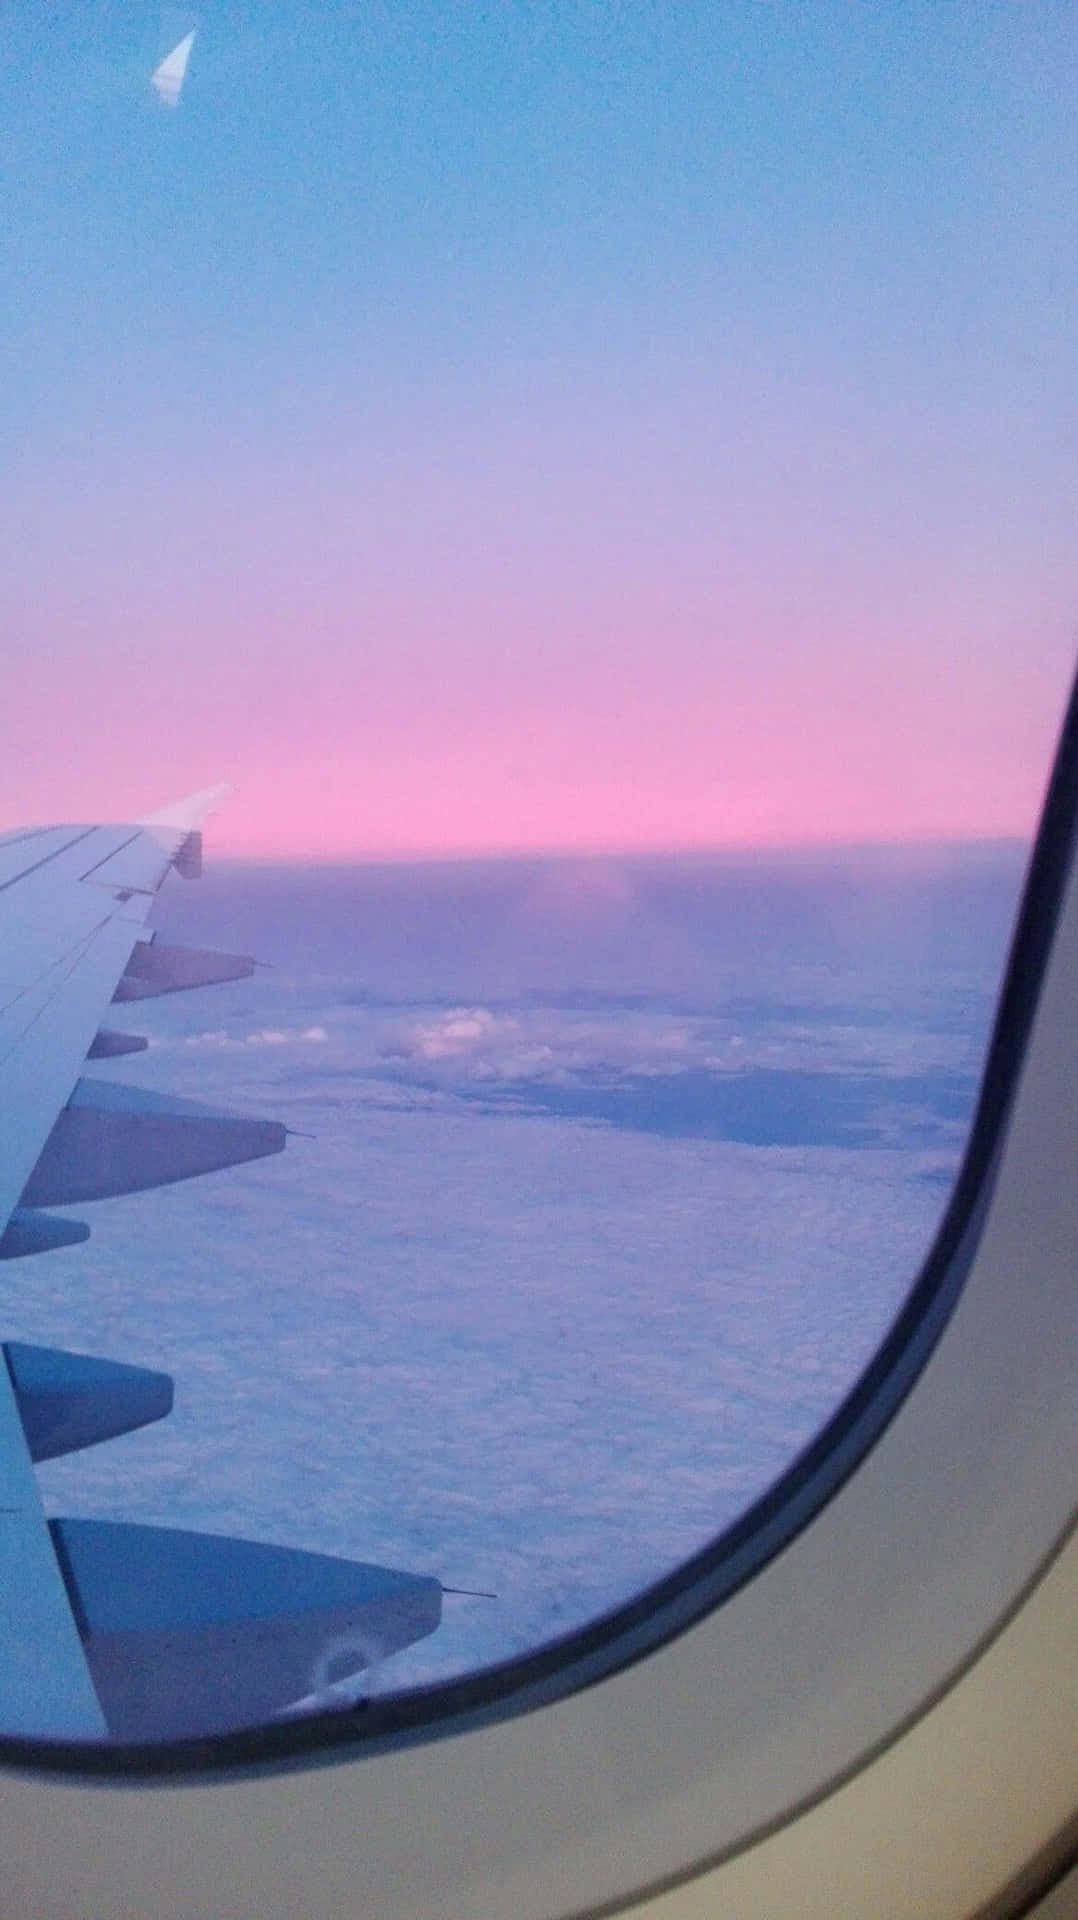 A view of the sky from a plane window. - Travel